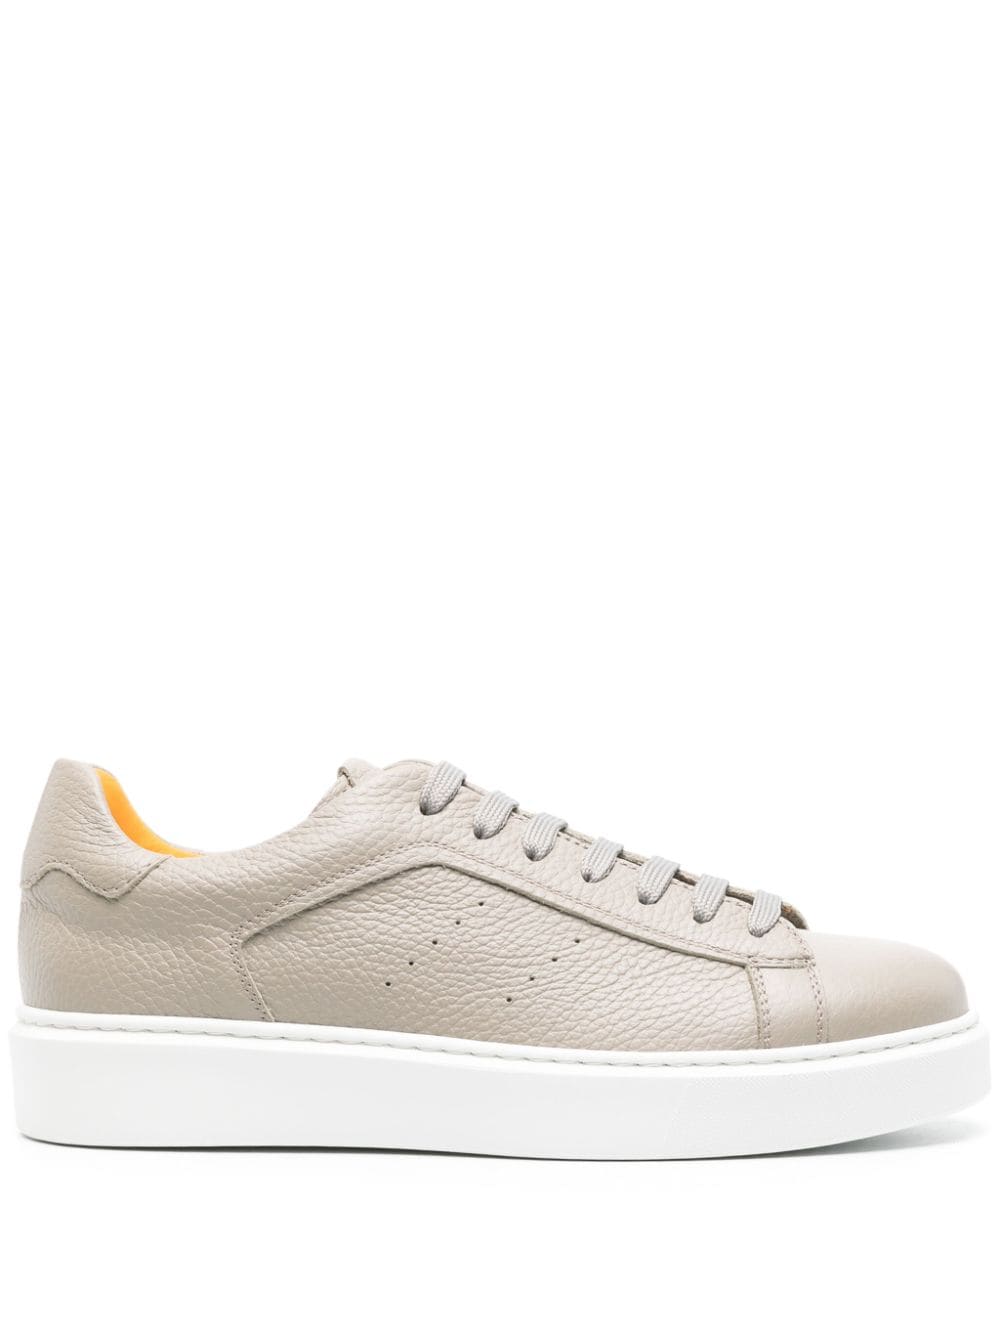 Doucal's lace-up leather sneakers - Grey von Doucal's